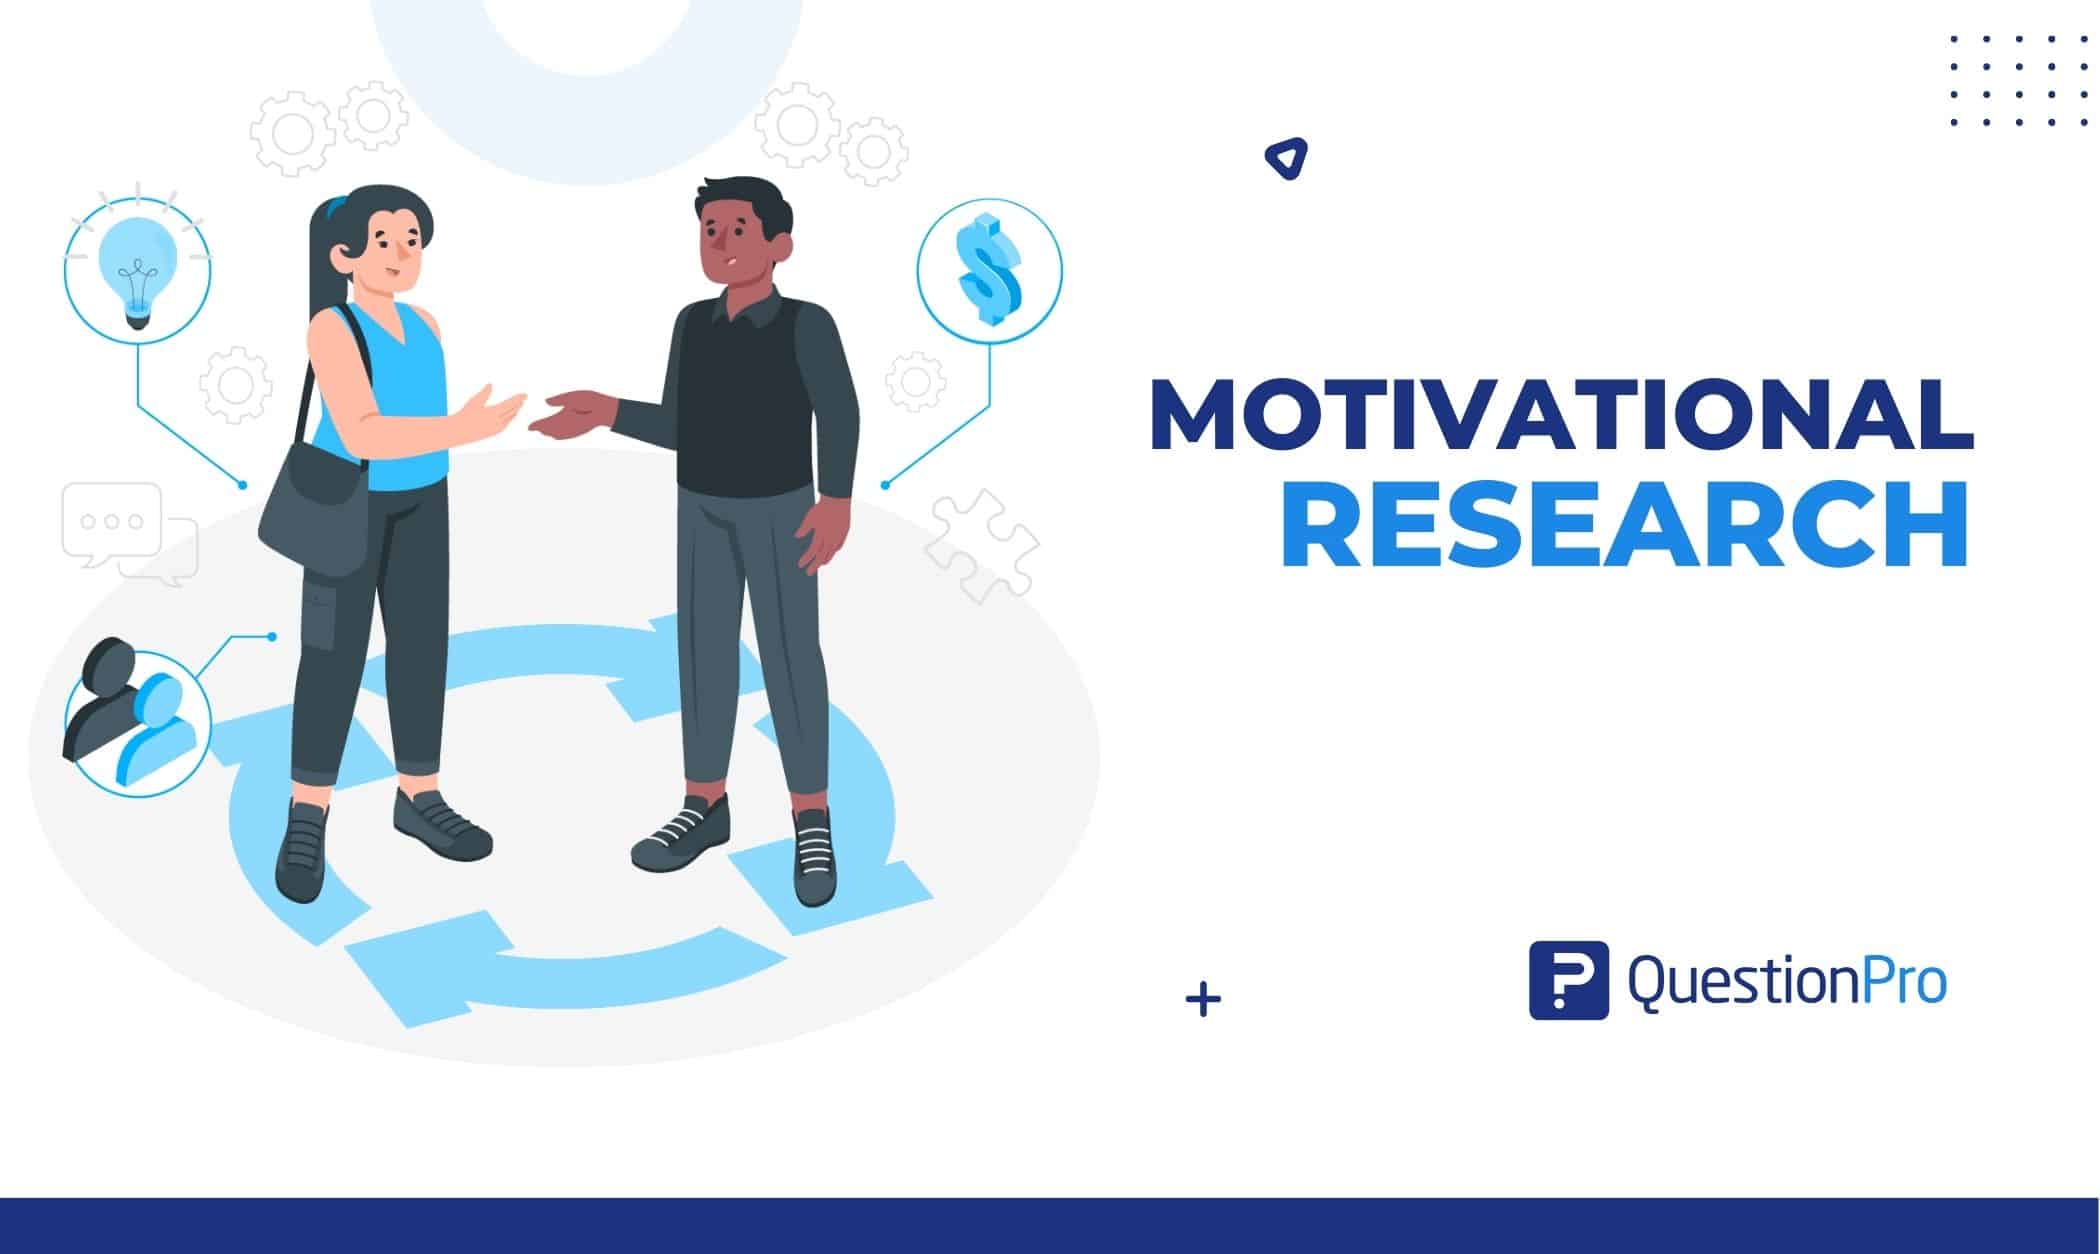 Motivational research is a type of marketing research that attempts to understand why customers act the way they do. Find more about it here.